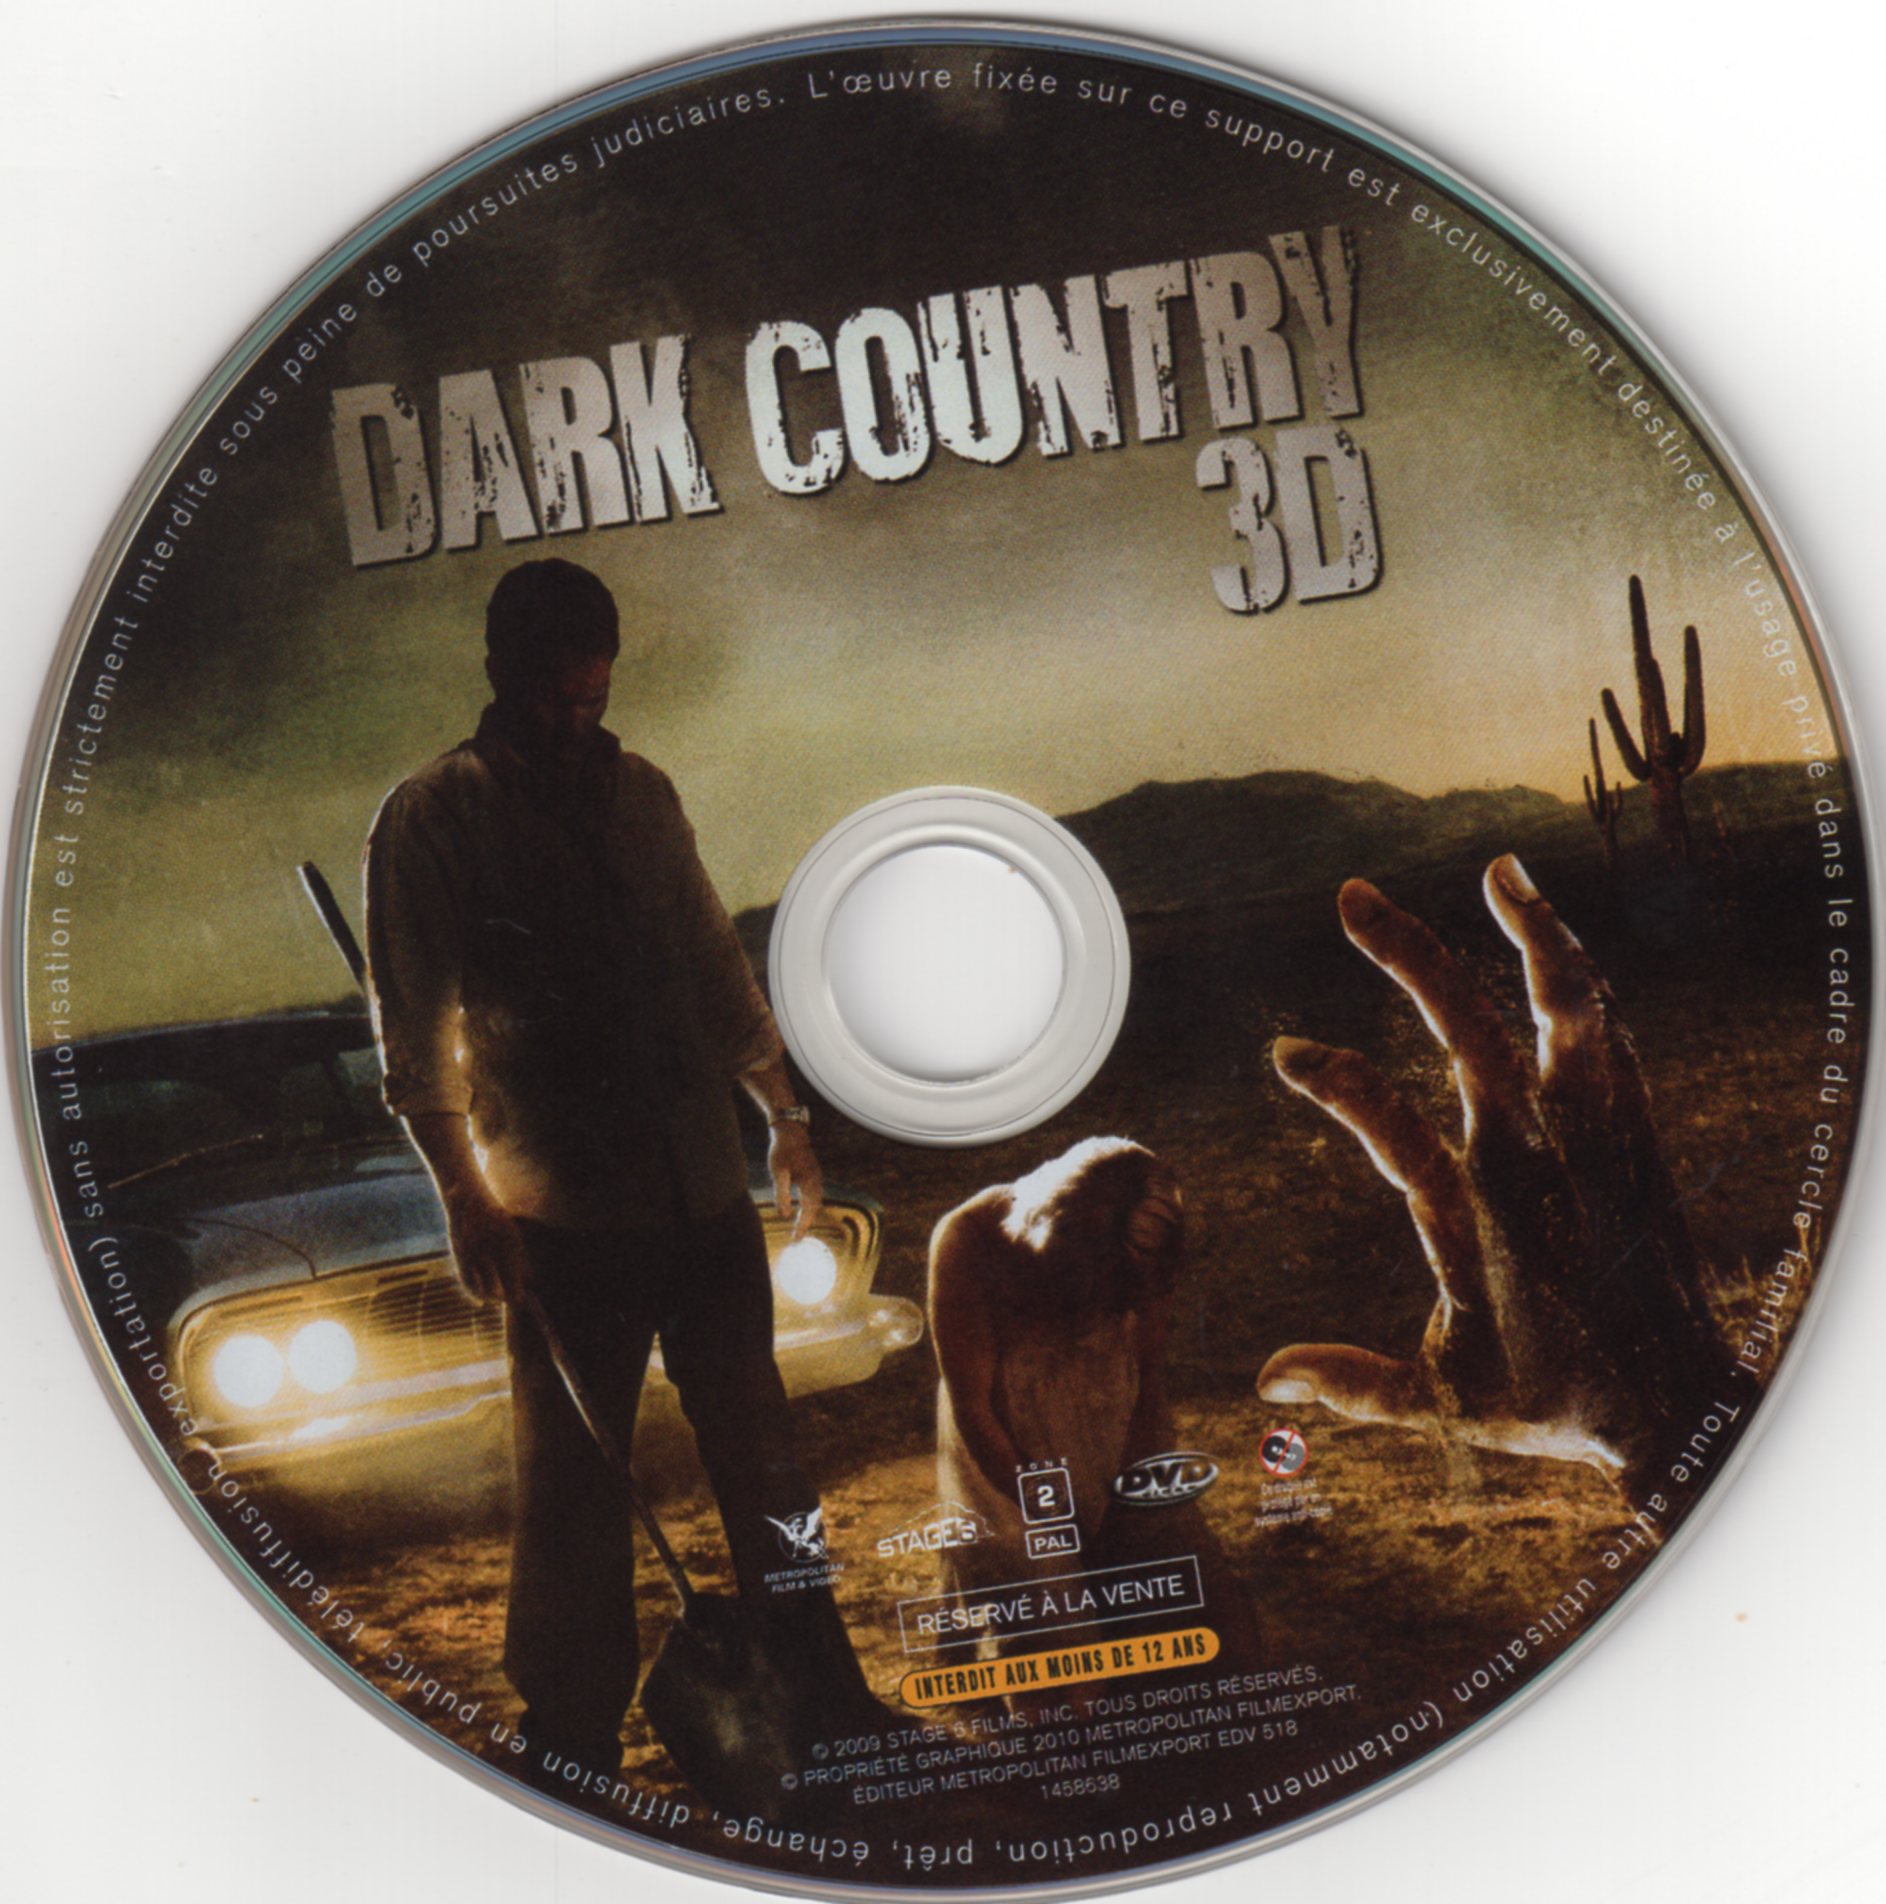 Dark country 3D